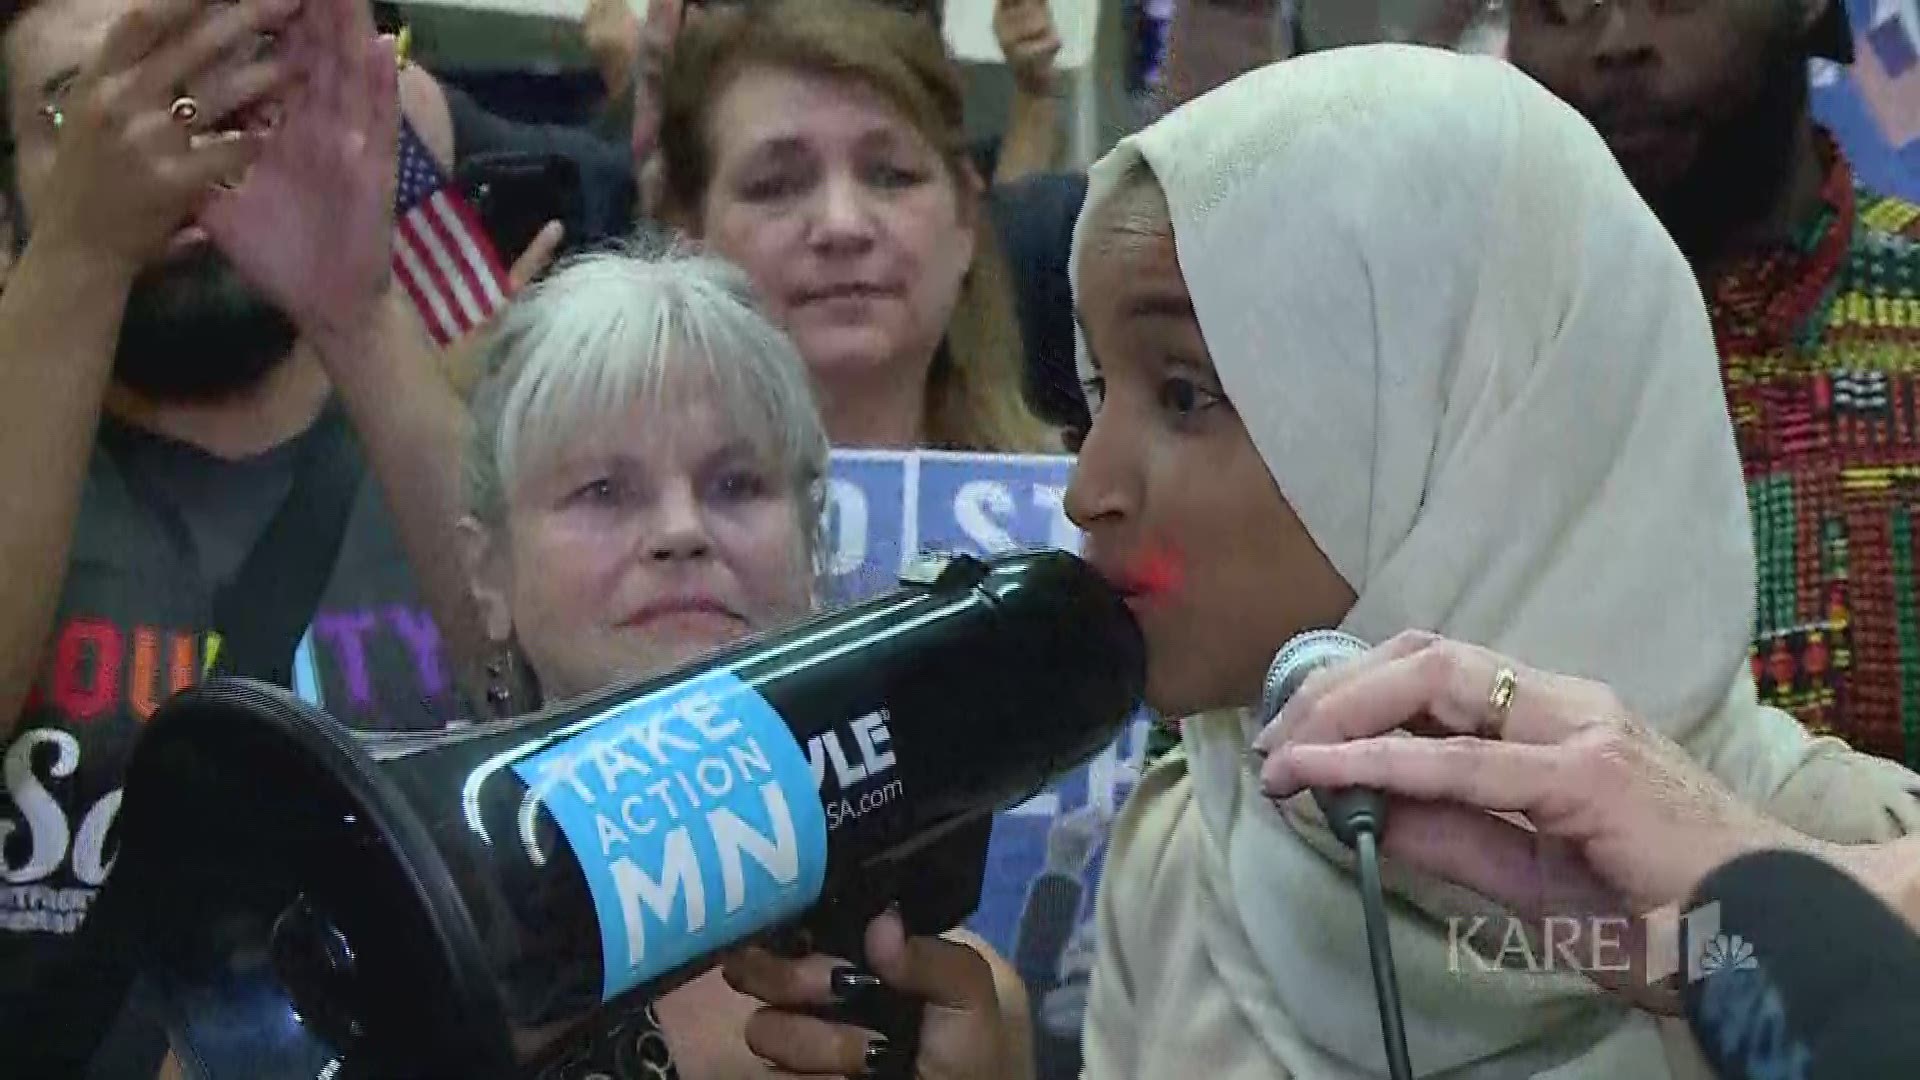 Rep. Ilhan Omar may be embattled in Washington, but she was welcomed to Minneapolis by a cheering crowd on Thursday. https://kare11.tv/2GiPXlI